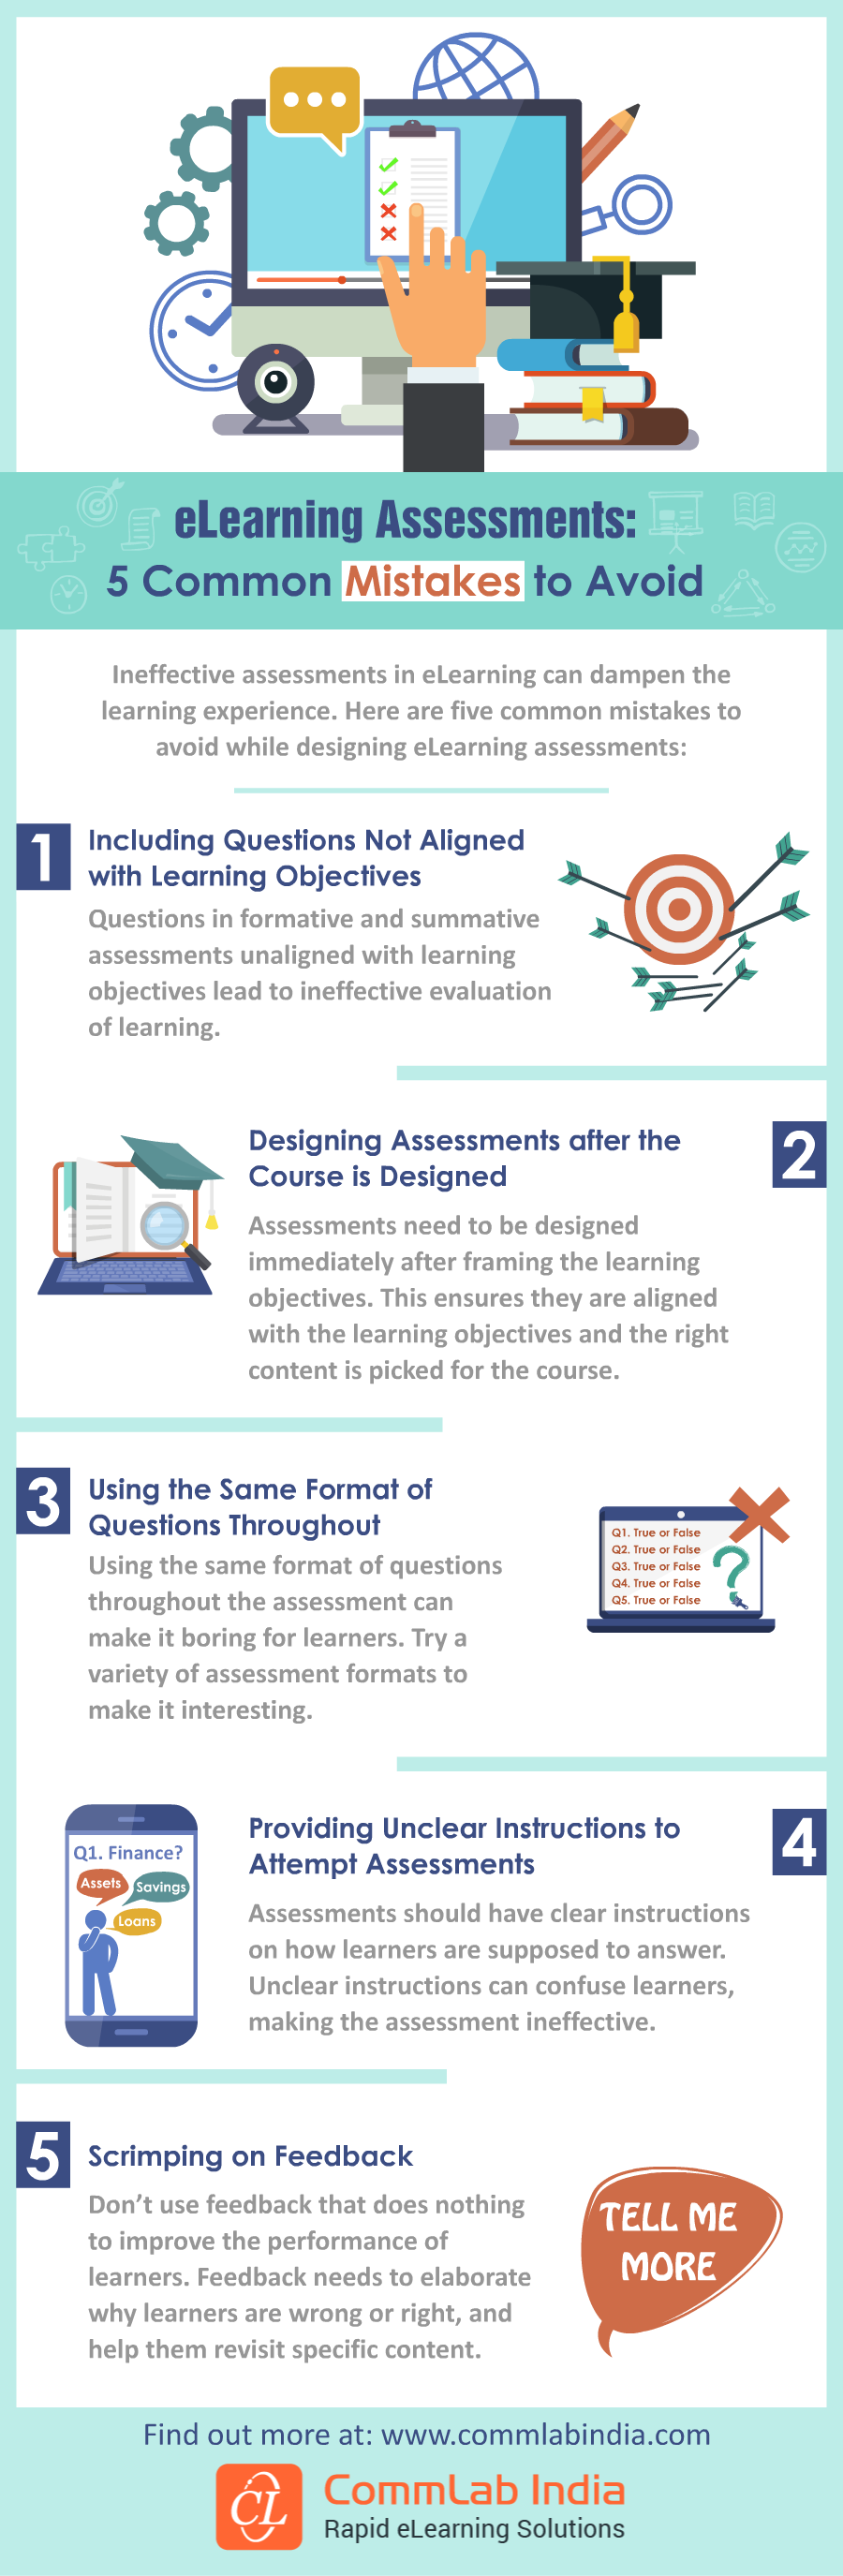 eLearning Assessments: 5 Common Mistakes to Avoid [Infographic]